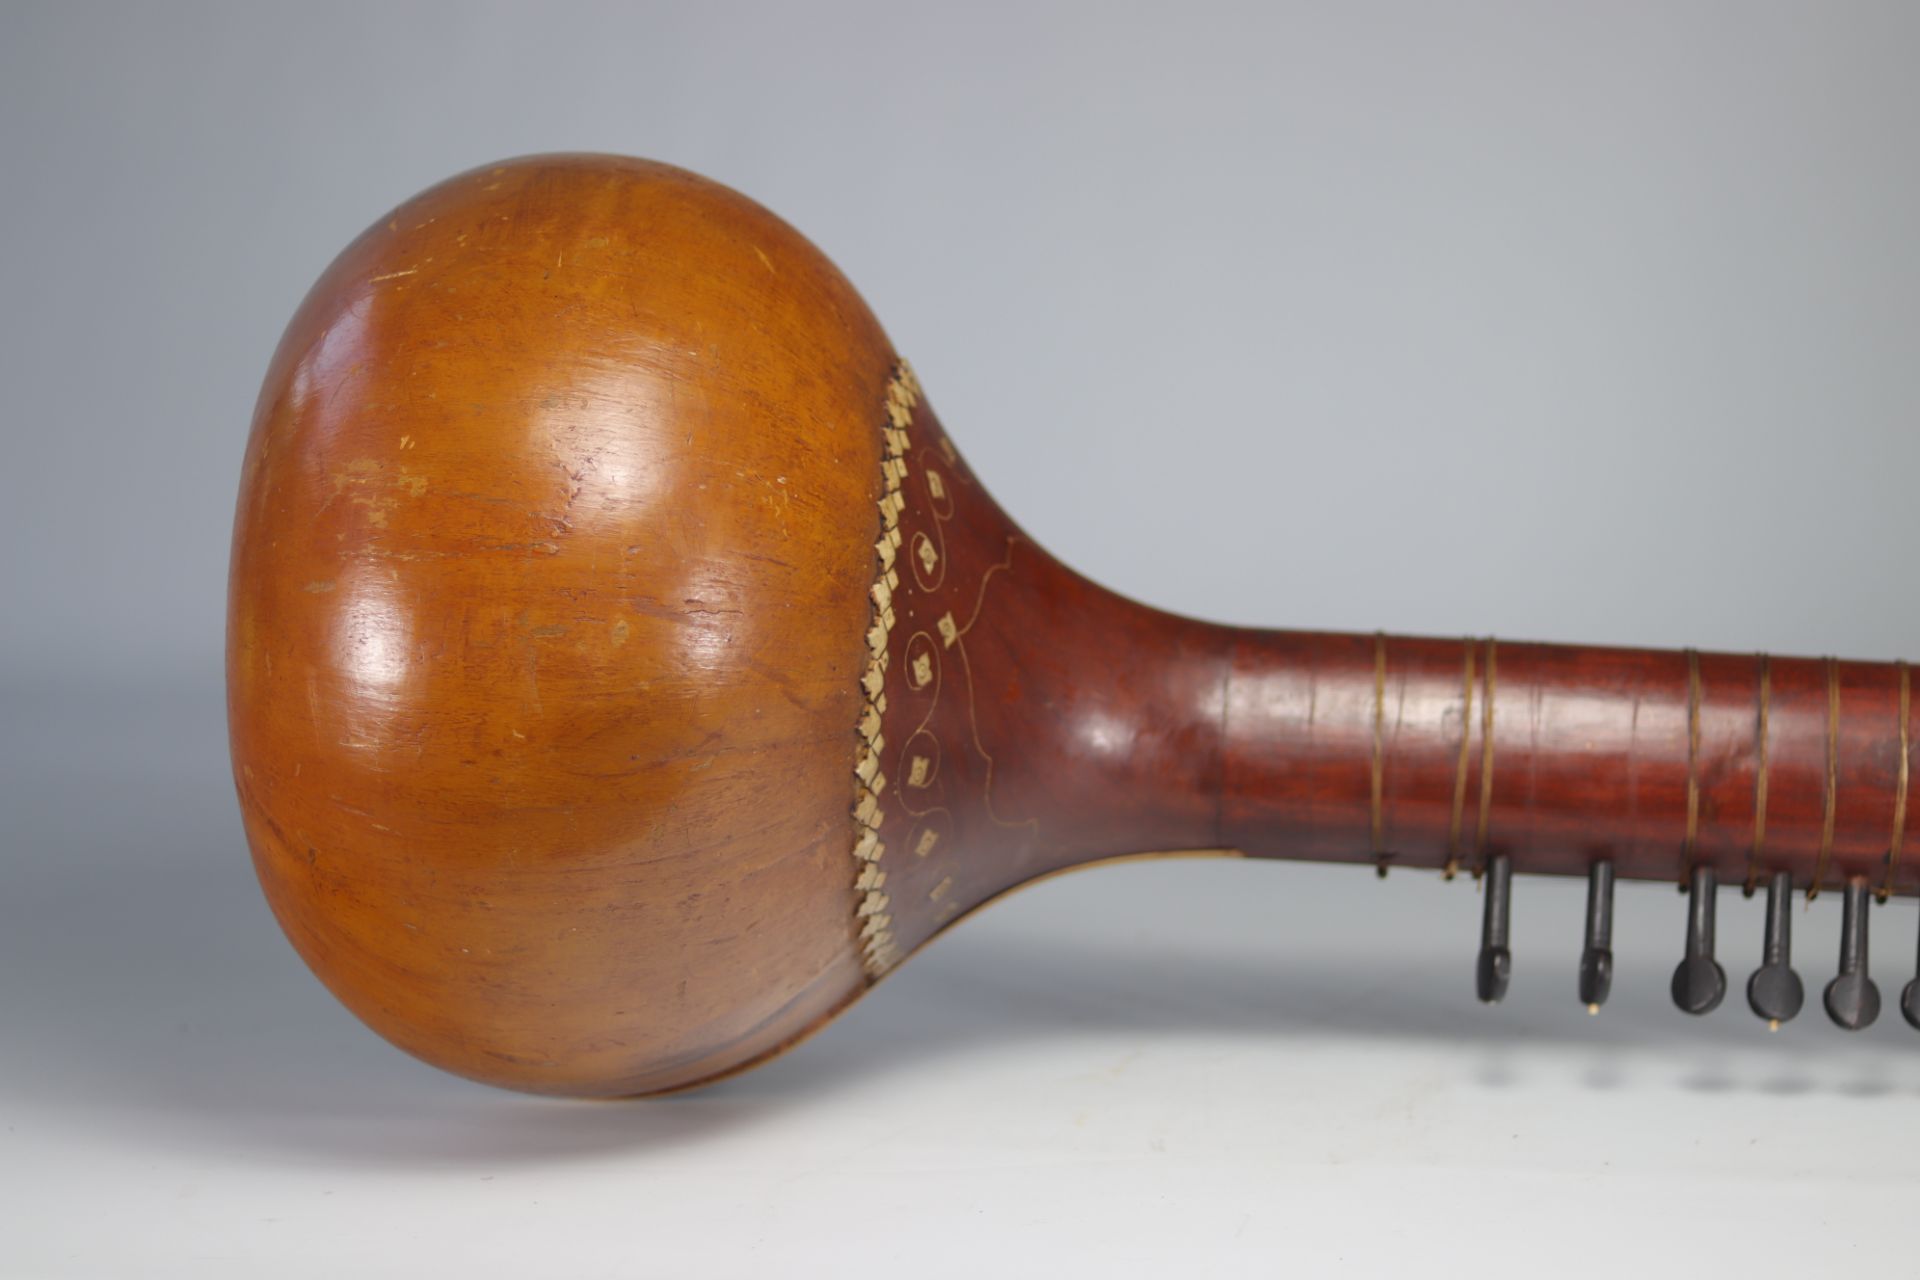 Stringed instrument called "La Vina" from India - Image 4 of 4